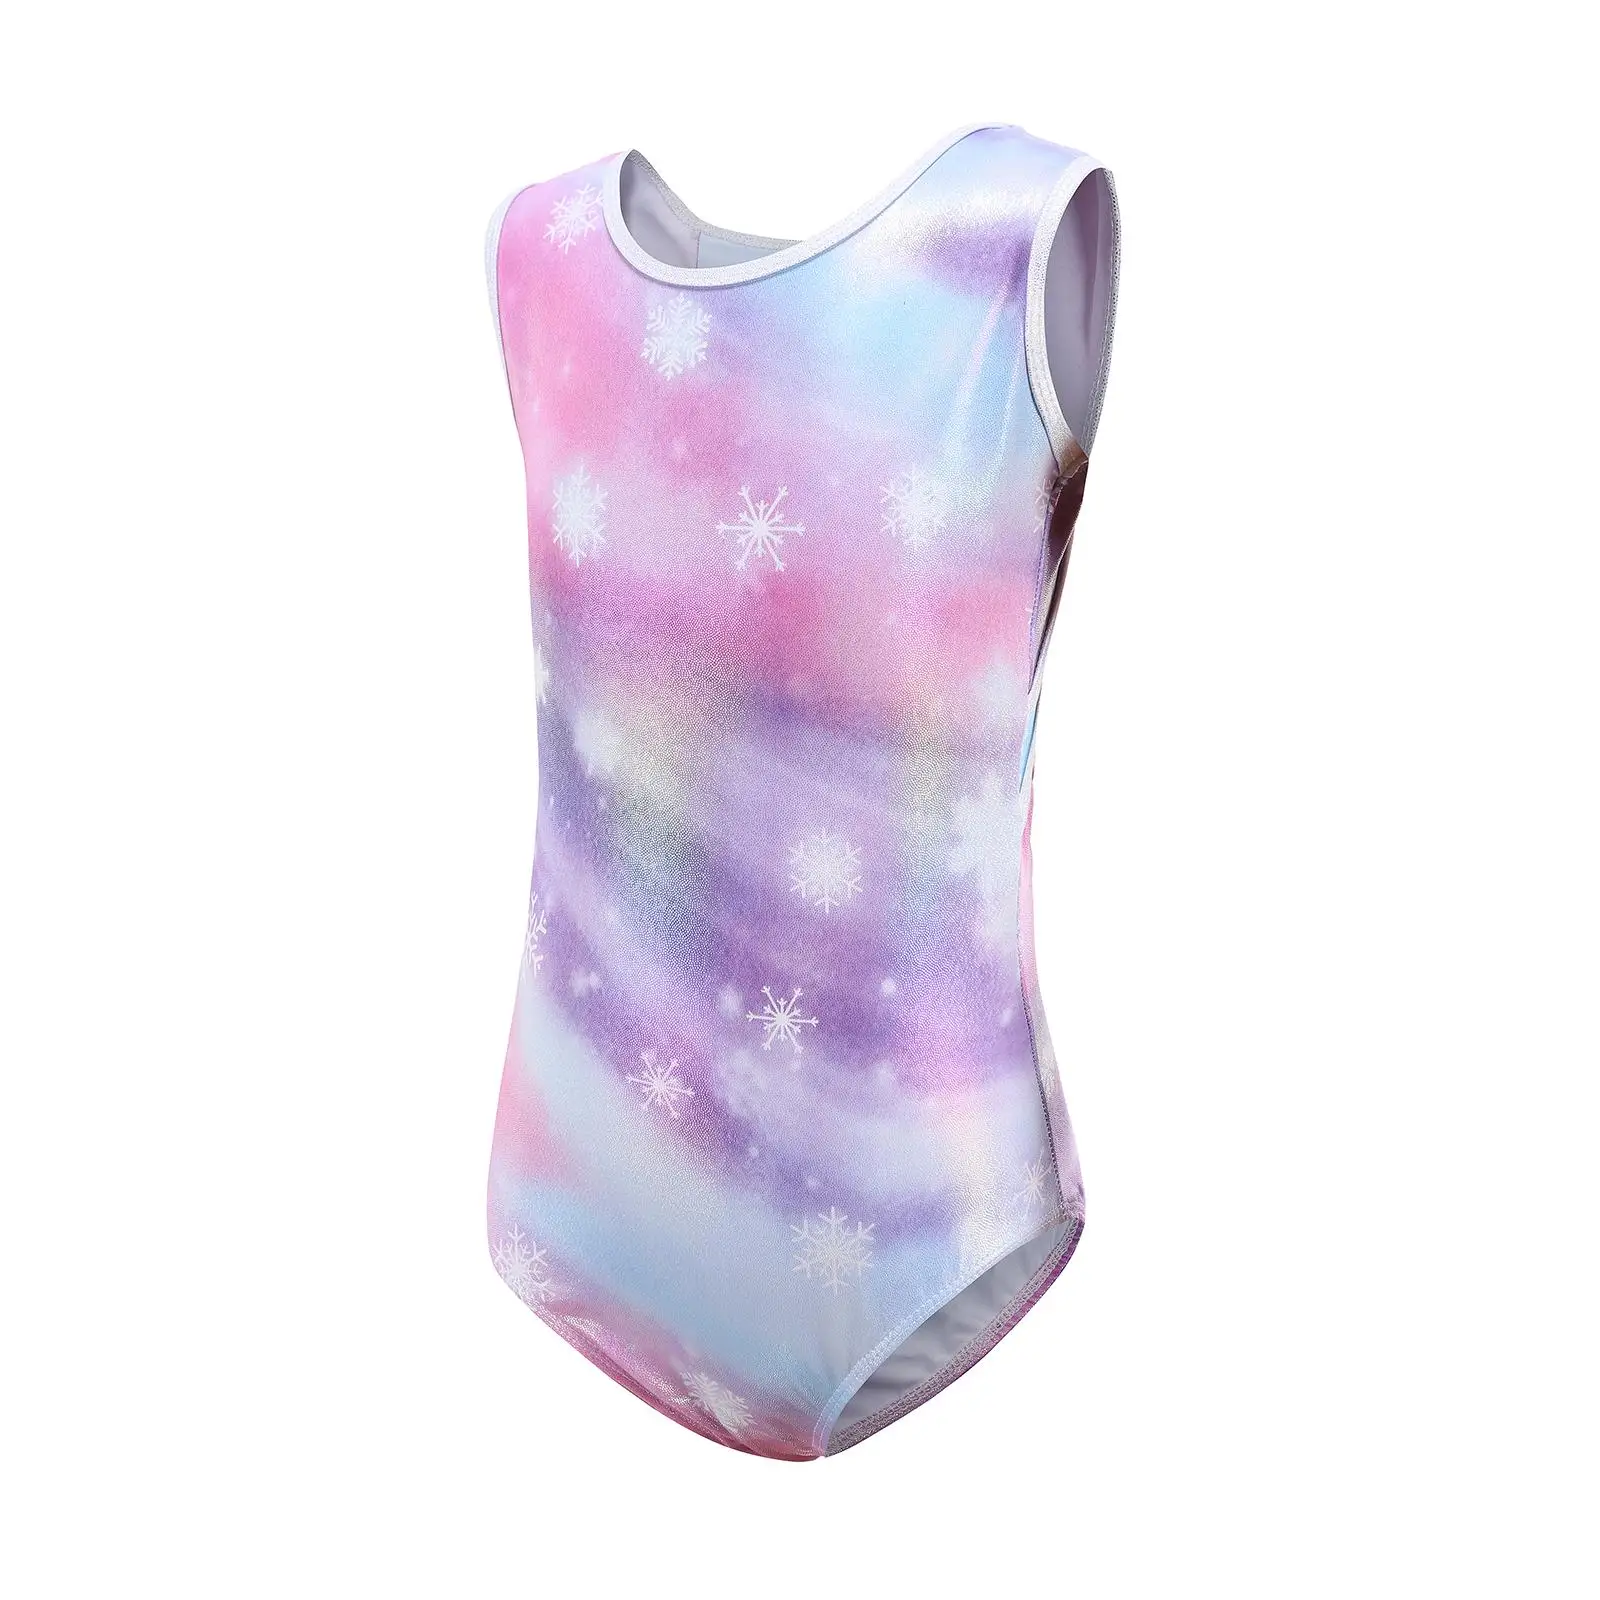 Colorful Gymnastics Leotards Dancewear Polyester Bodysuit Elastic Clothes Sleeveless for fitness Child Teens